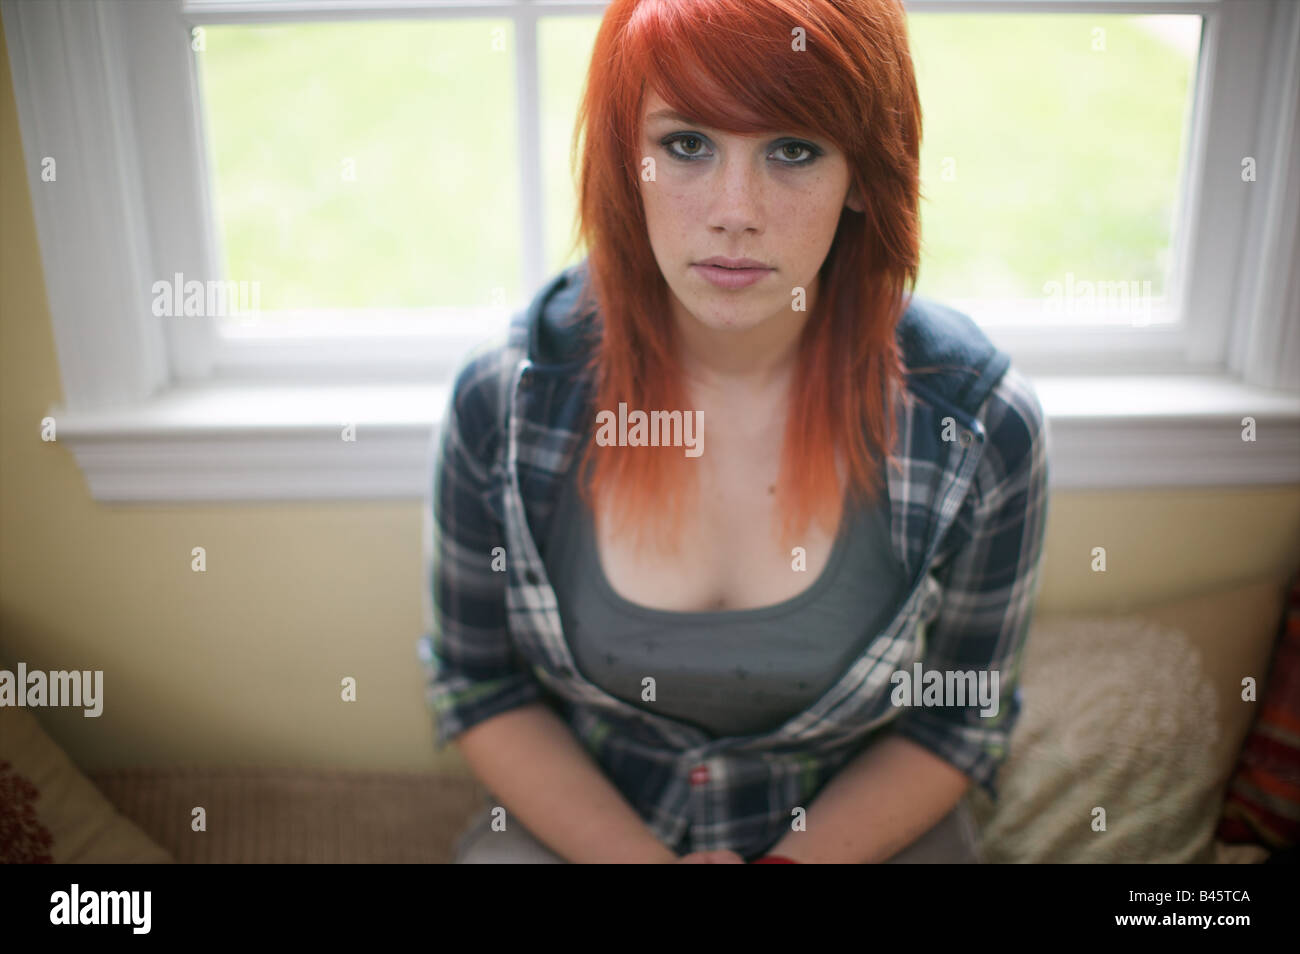 Girl with shocking orange hair and blue flannel work shirt gazes  disconsolately at camera. It's a sunny day, but raining inside Stock Photo  - Alamy